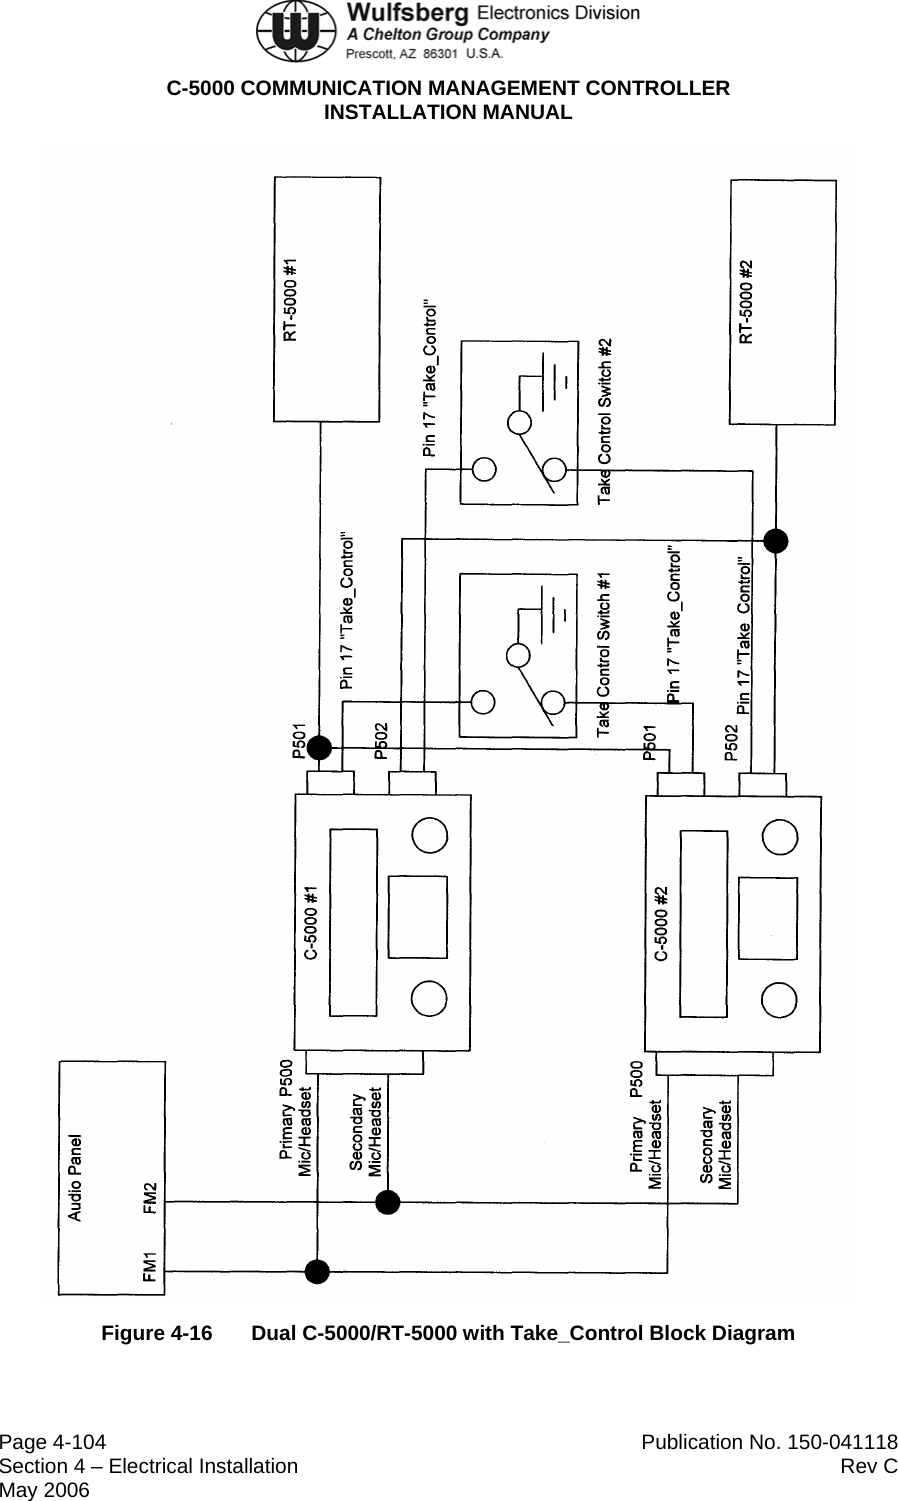  C-5000 COMMUNICATION MANAGEMENT CONTROLLER INSTALLATION MANUAL  Page 4-104  Publication No. 150-041118 Section 4 – Electrical Installation  Rev C May 2006  Figure 4-16  Dual C-5000/RT-5000 with Take_Control Block Diagram 